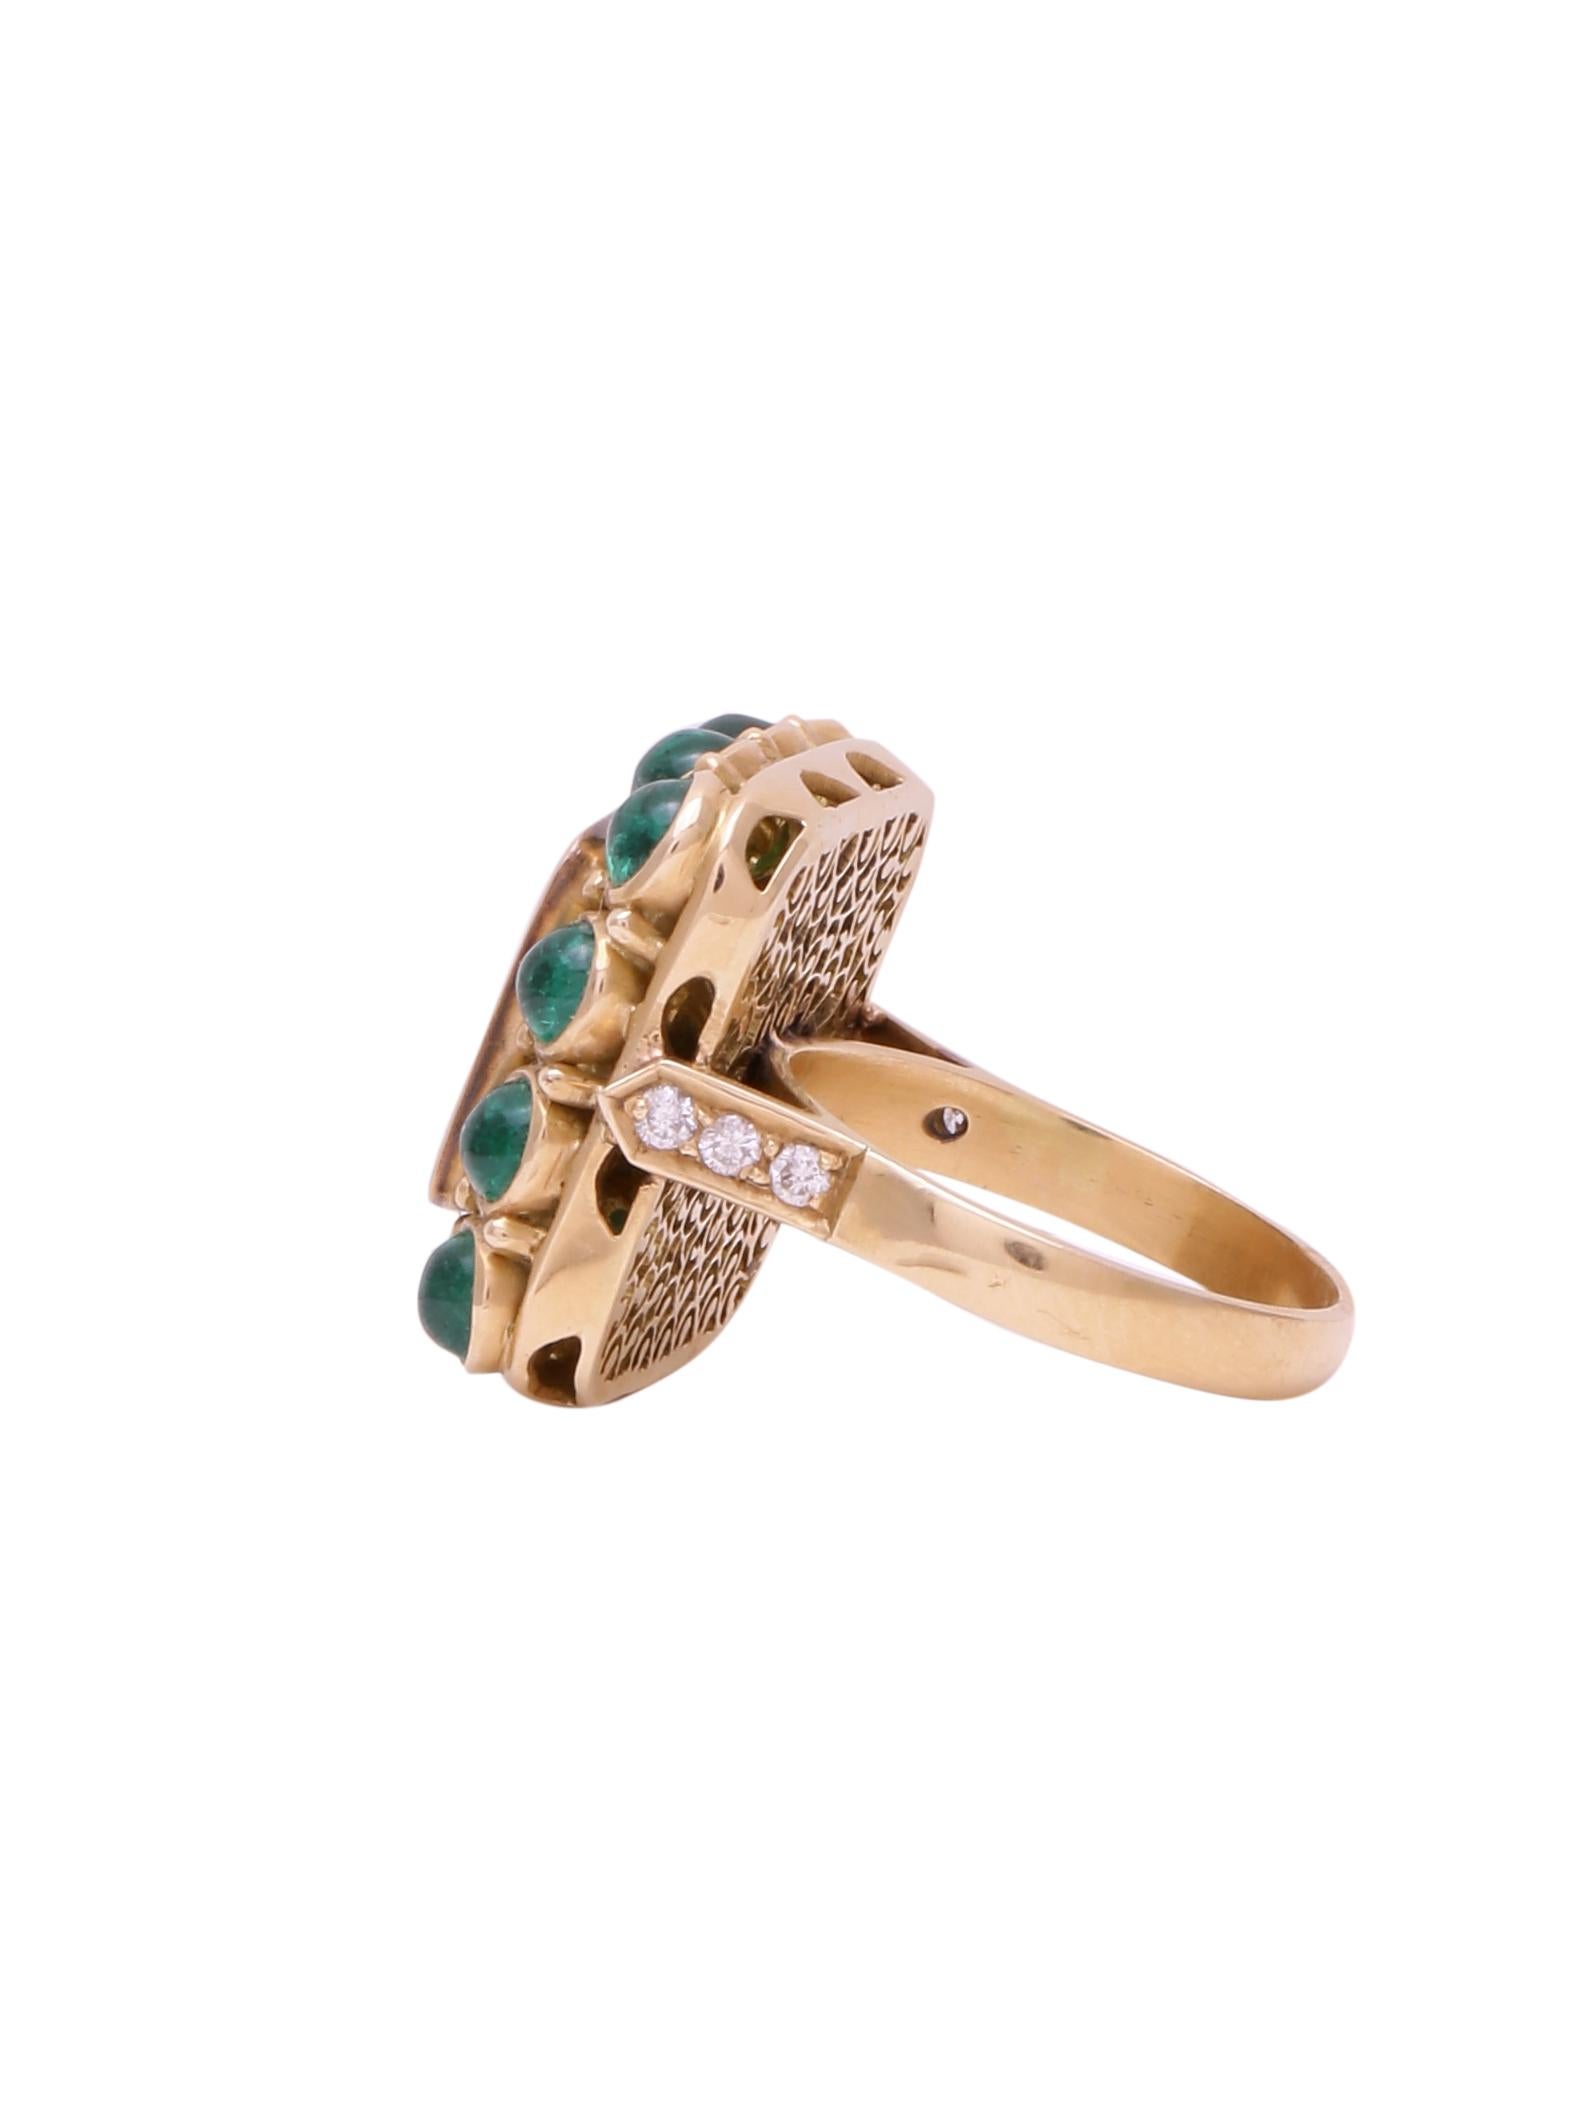 Rose Cut 2.24 cts Diamond Rosecut and Emerald Round Cabochon Ring Handcrafted in 18k Gold